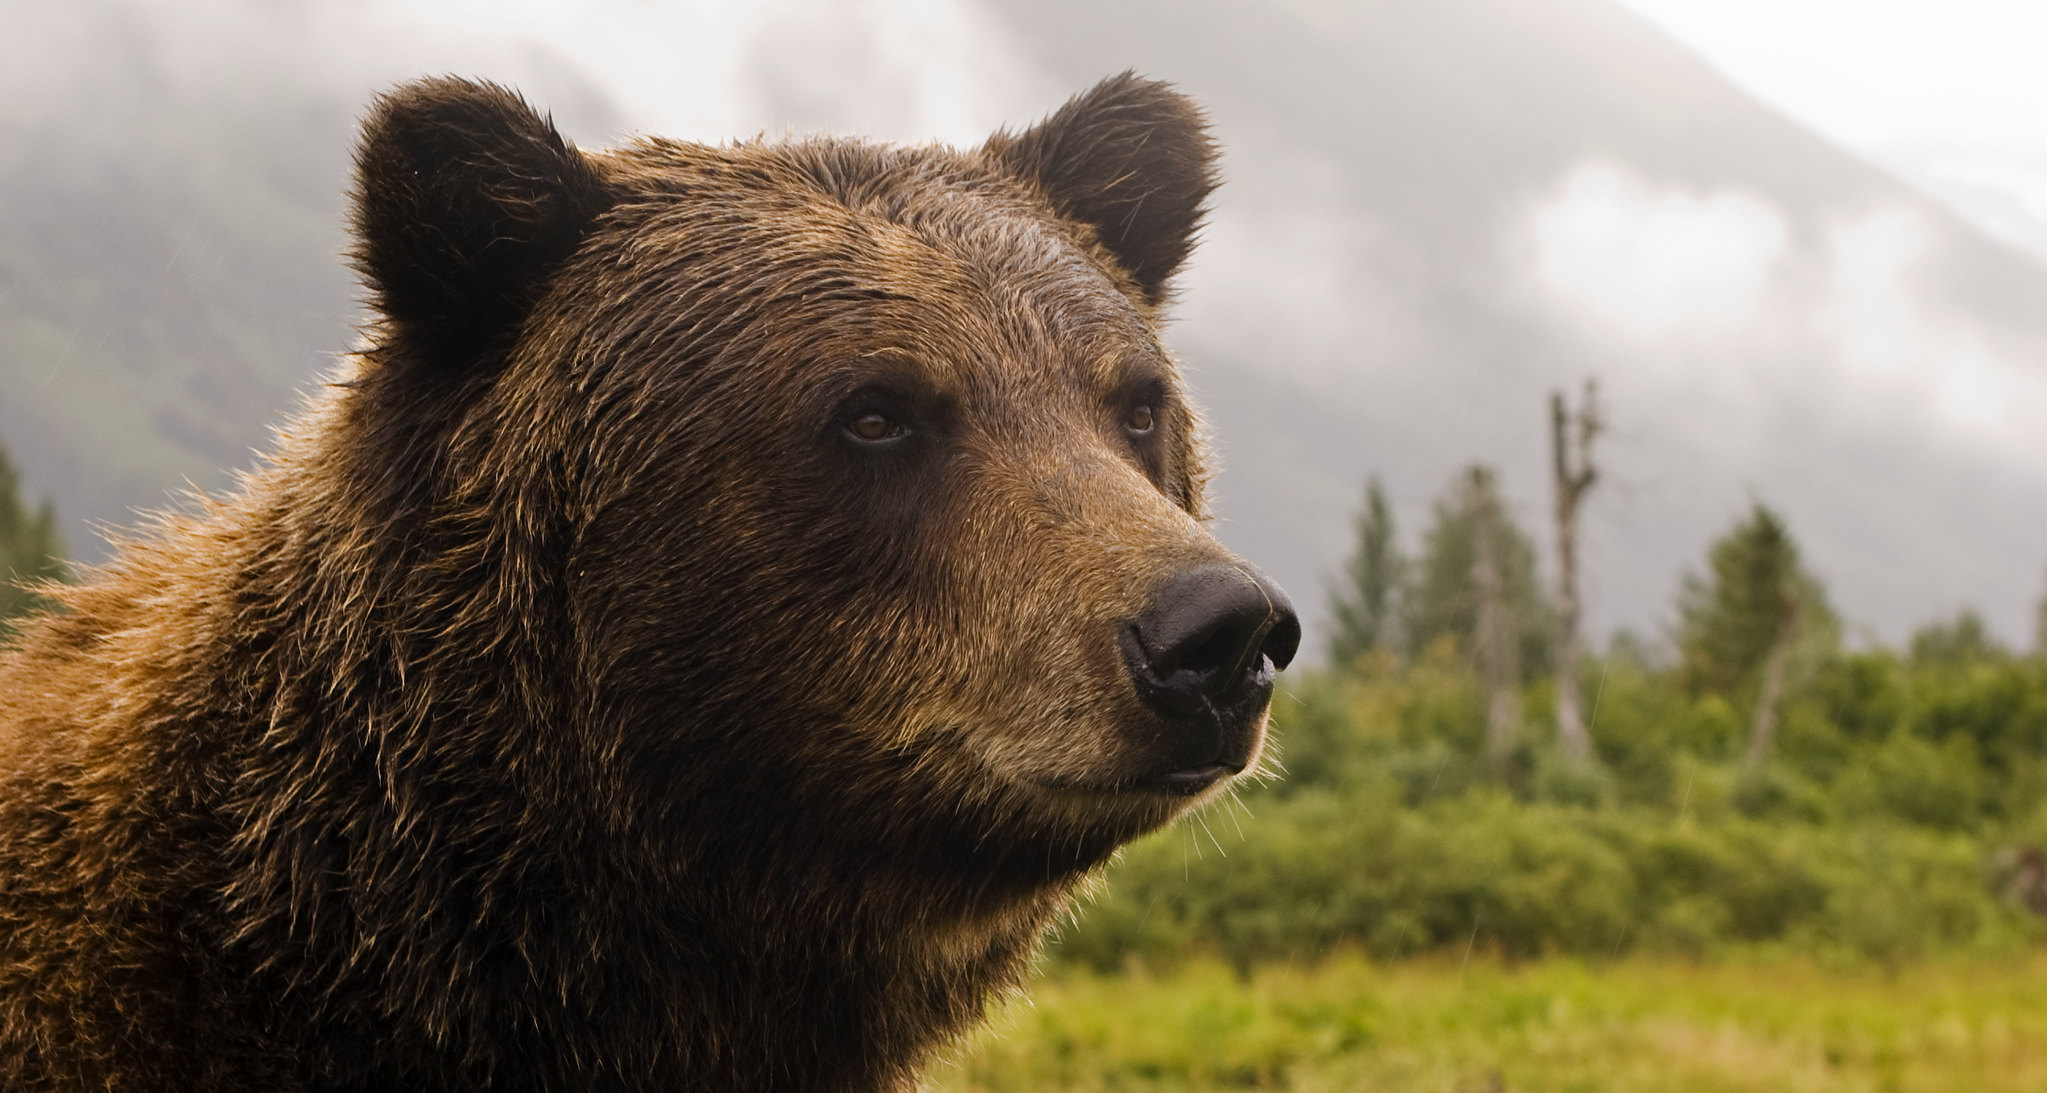 A portrait of a grizzly bear. (photo © Princess Lodges via the Flickr Creative Commons)